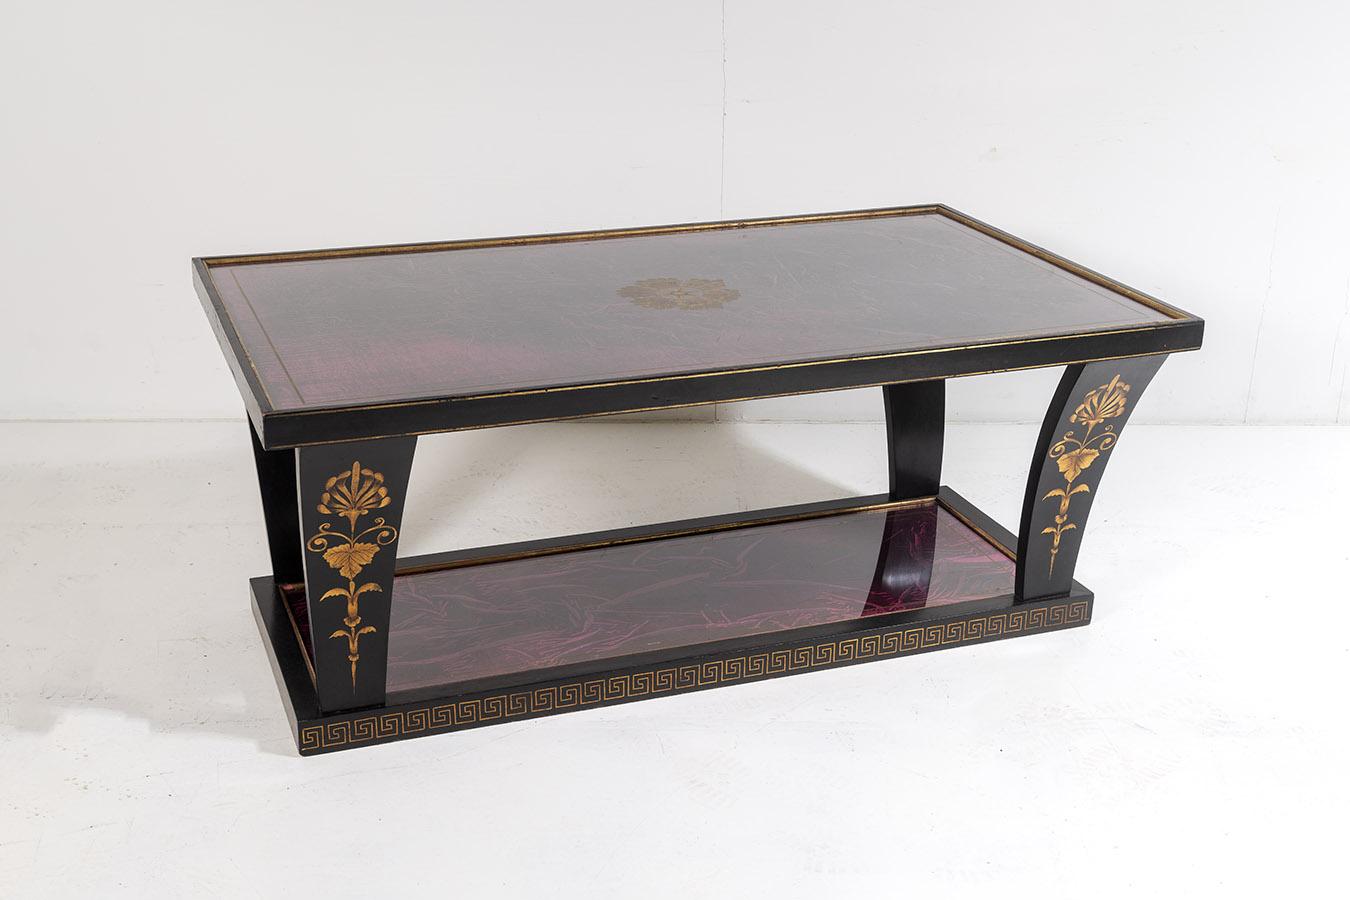 A stylish and highly decorative vintage Italian coffee table. An unusual design, rectangular with four curved legs leading to a bottom glass shelf.
Ebonised finish with gold gilt detailing, floral motifs and Greek key pattern to the base. Top and